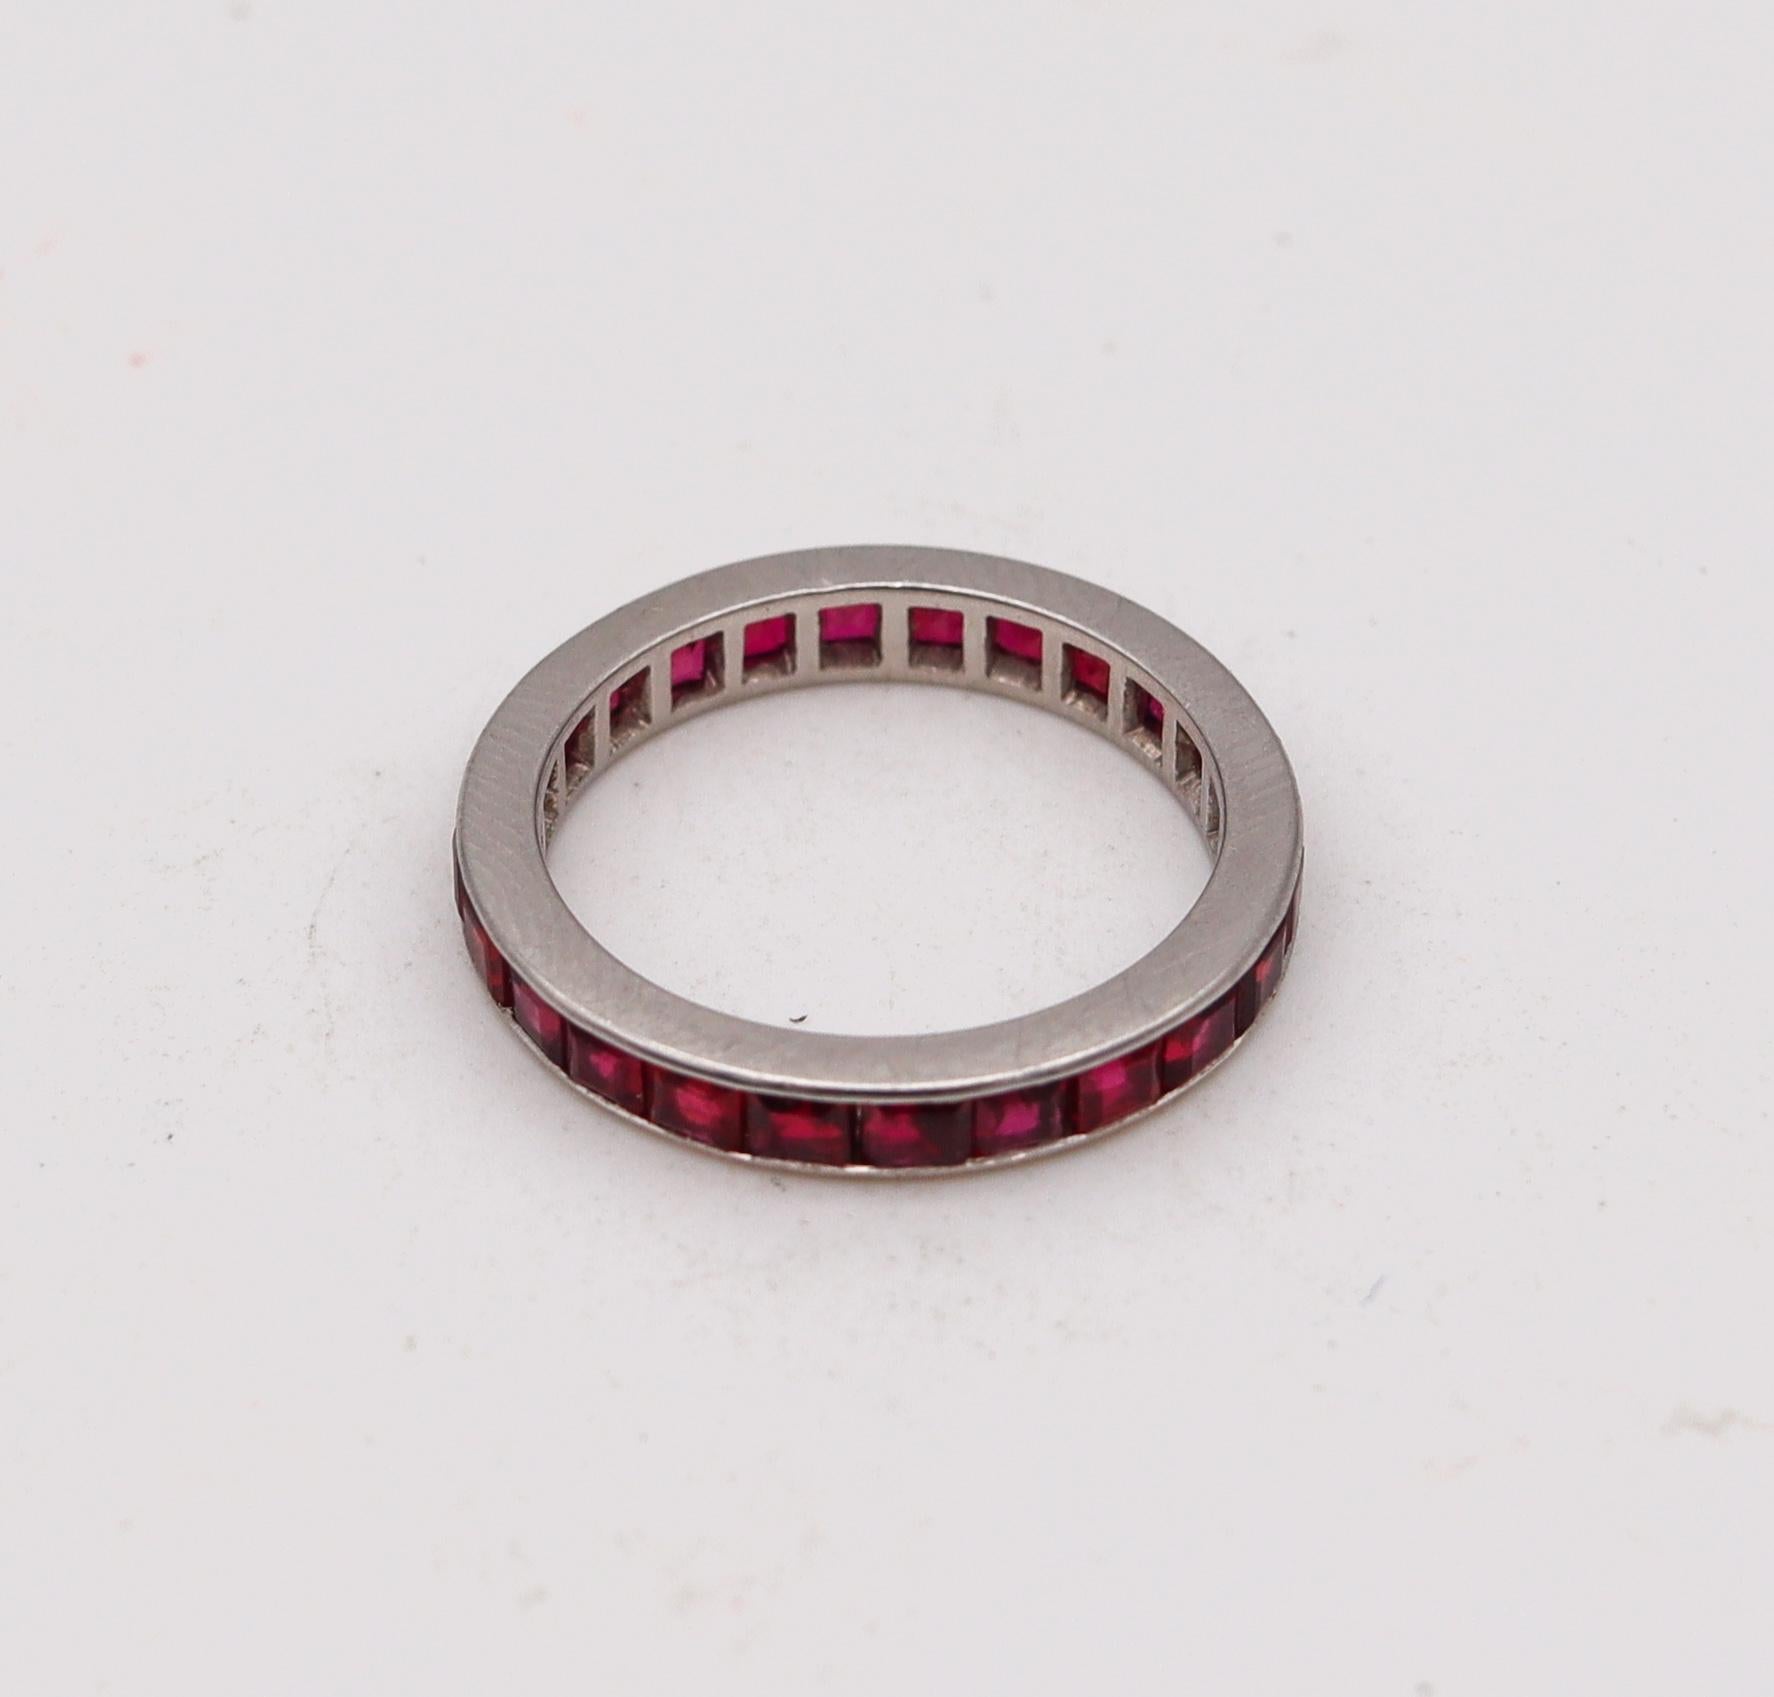 An eternity ring band with natural rubies.

Art-Deco eternity band ring crafted in America, circa 1930. It was crafted in solid .900/.999 platinum, with high polished finish and is mounted in a channel setting with 24 calibrated French squared cuts